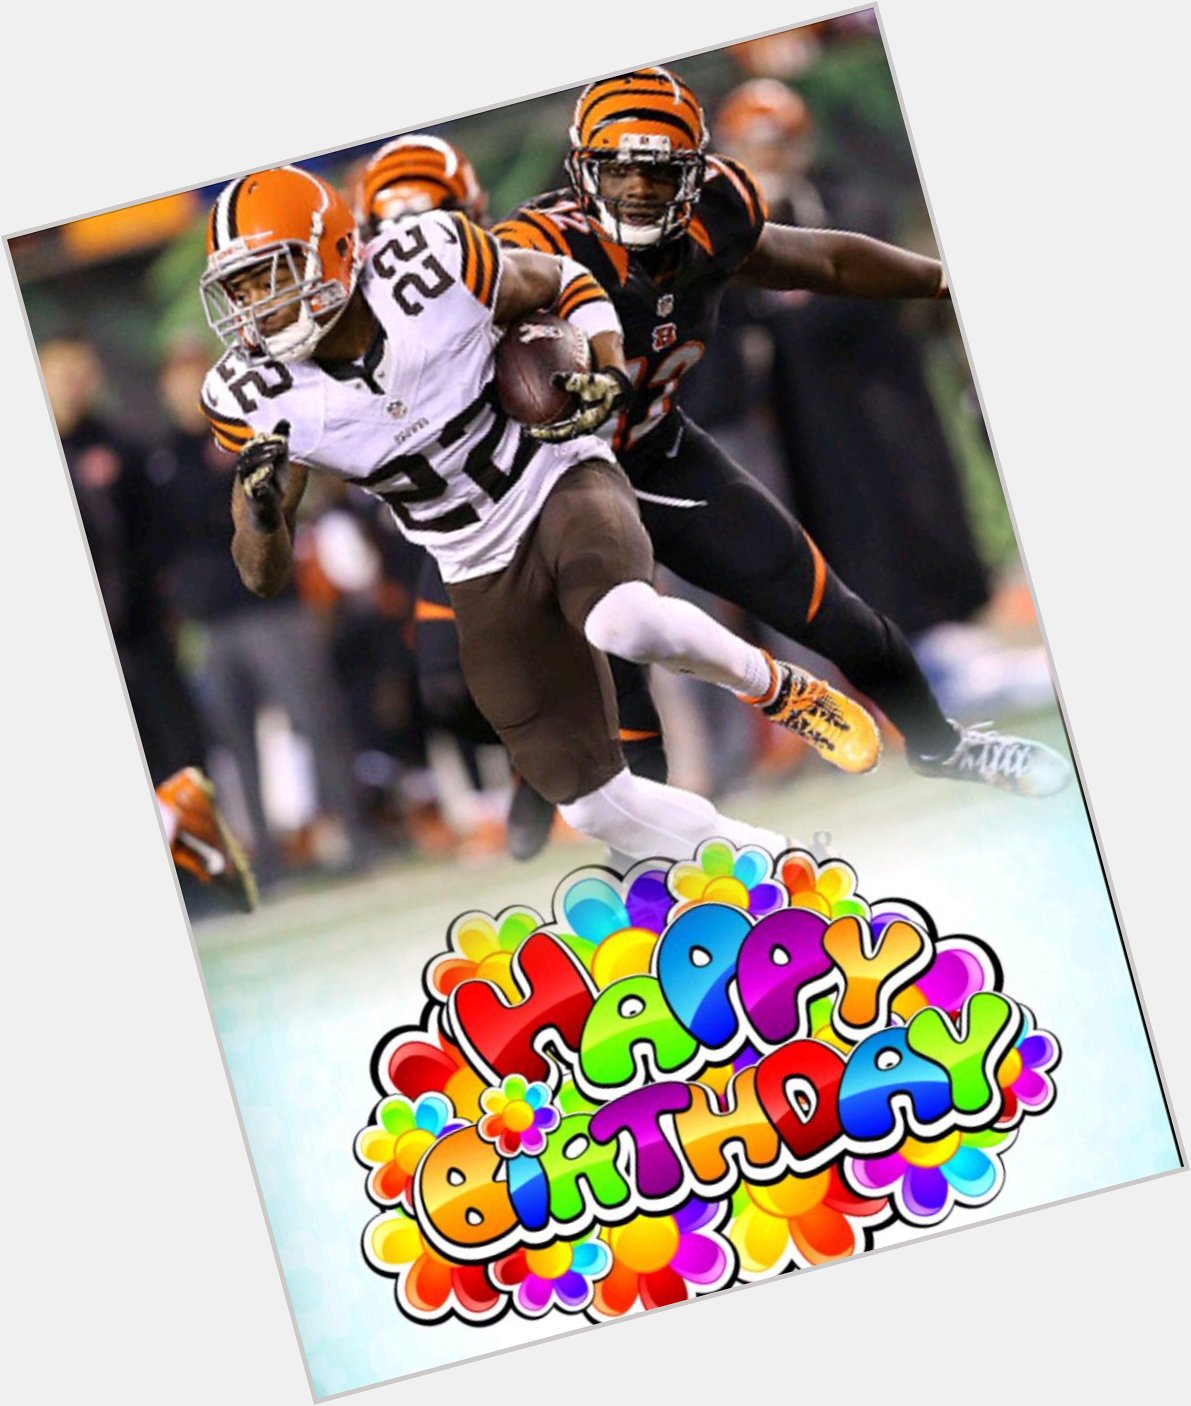 Happy Birthday to Buster Skrine! This year he will be playing in arguably the best NFL secondary! 